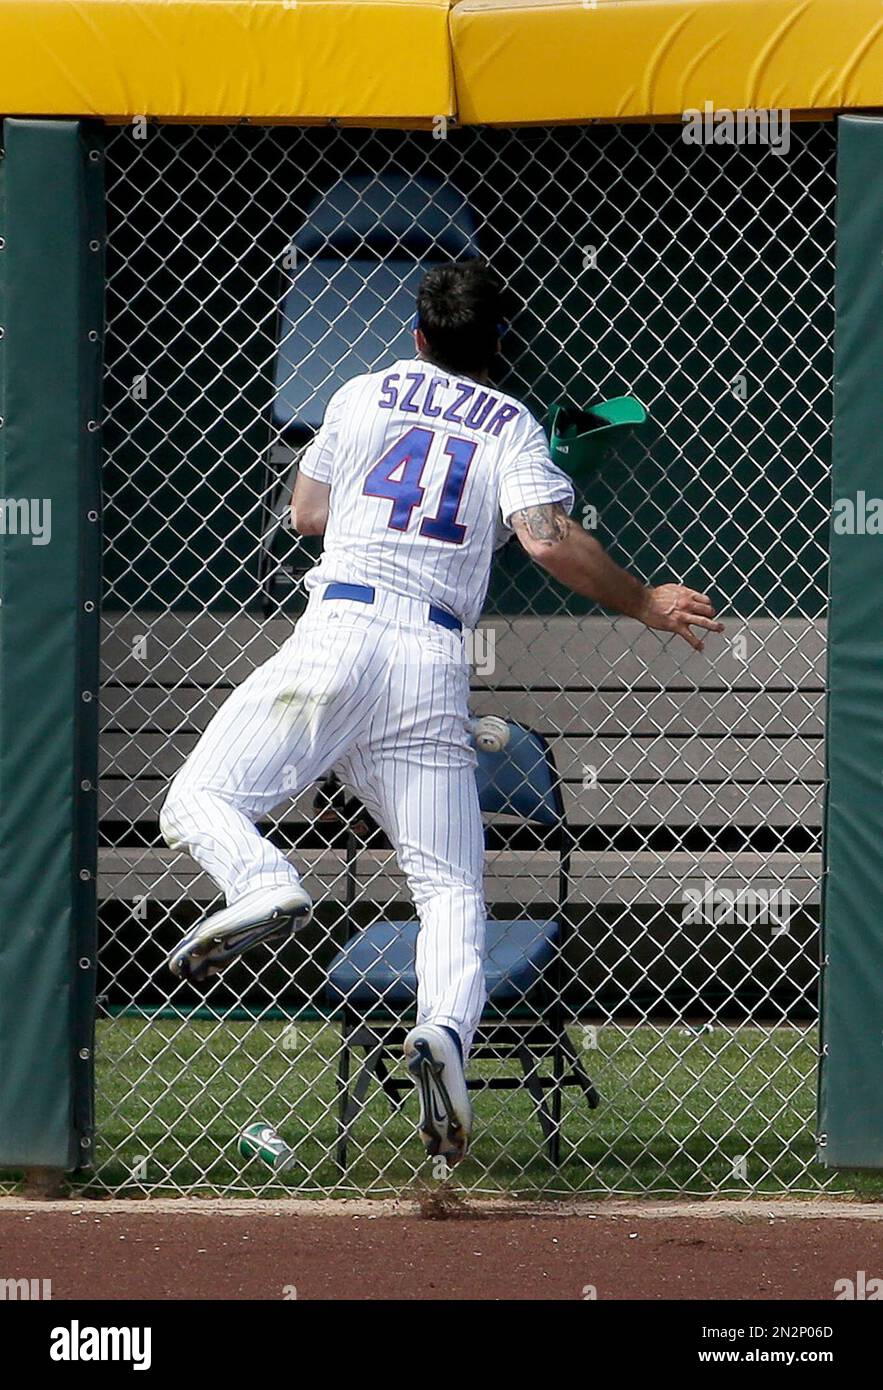 Chicago Cubs left fielder Matt Szczur collides with the bullpen fence  trying to catch a ball hit by Kansas City Royals' Alcides Escobar during  the sixth inning of a spring training baseball